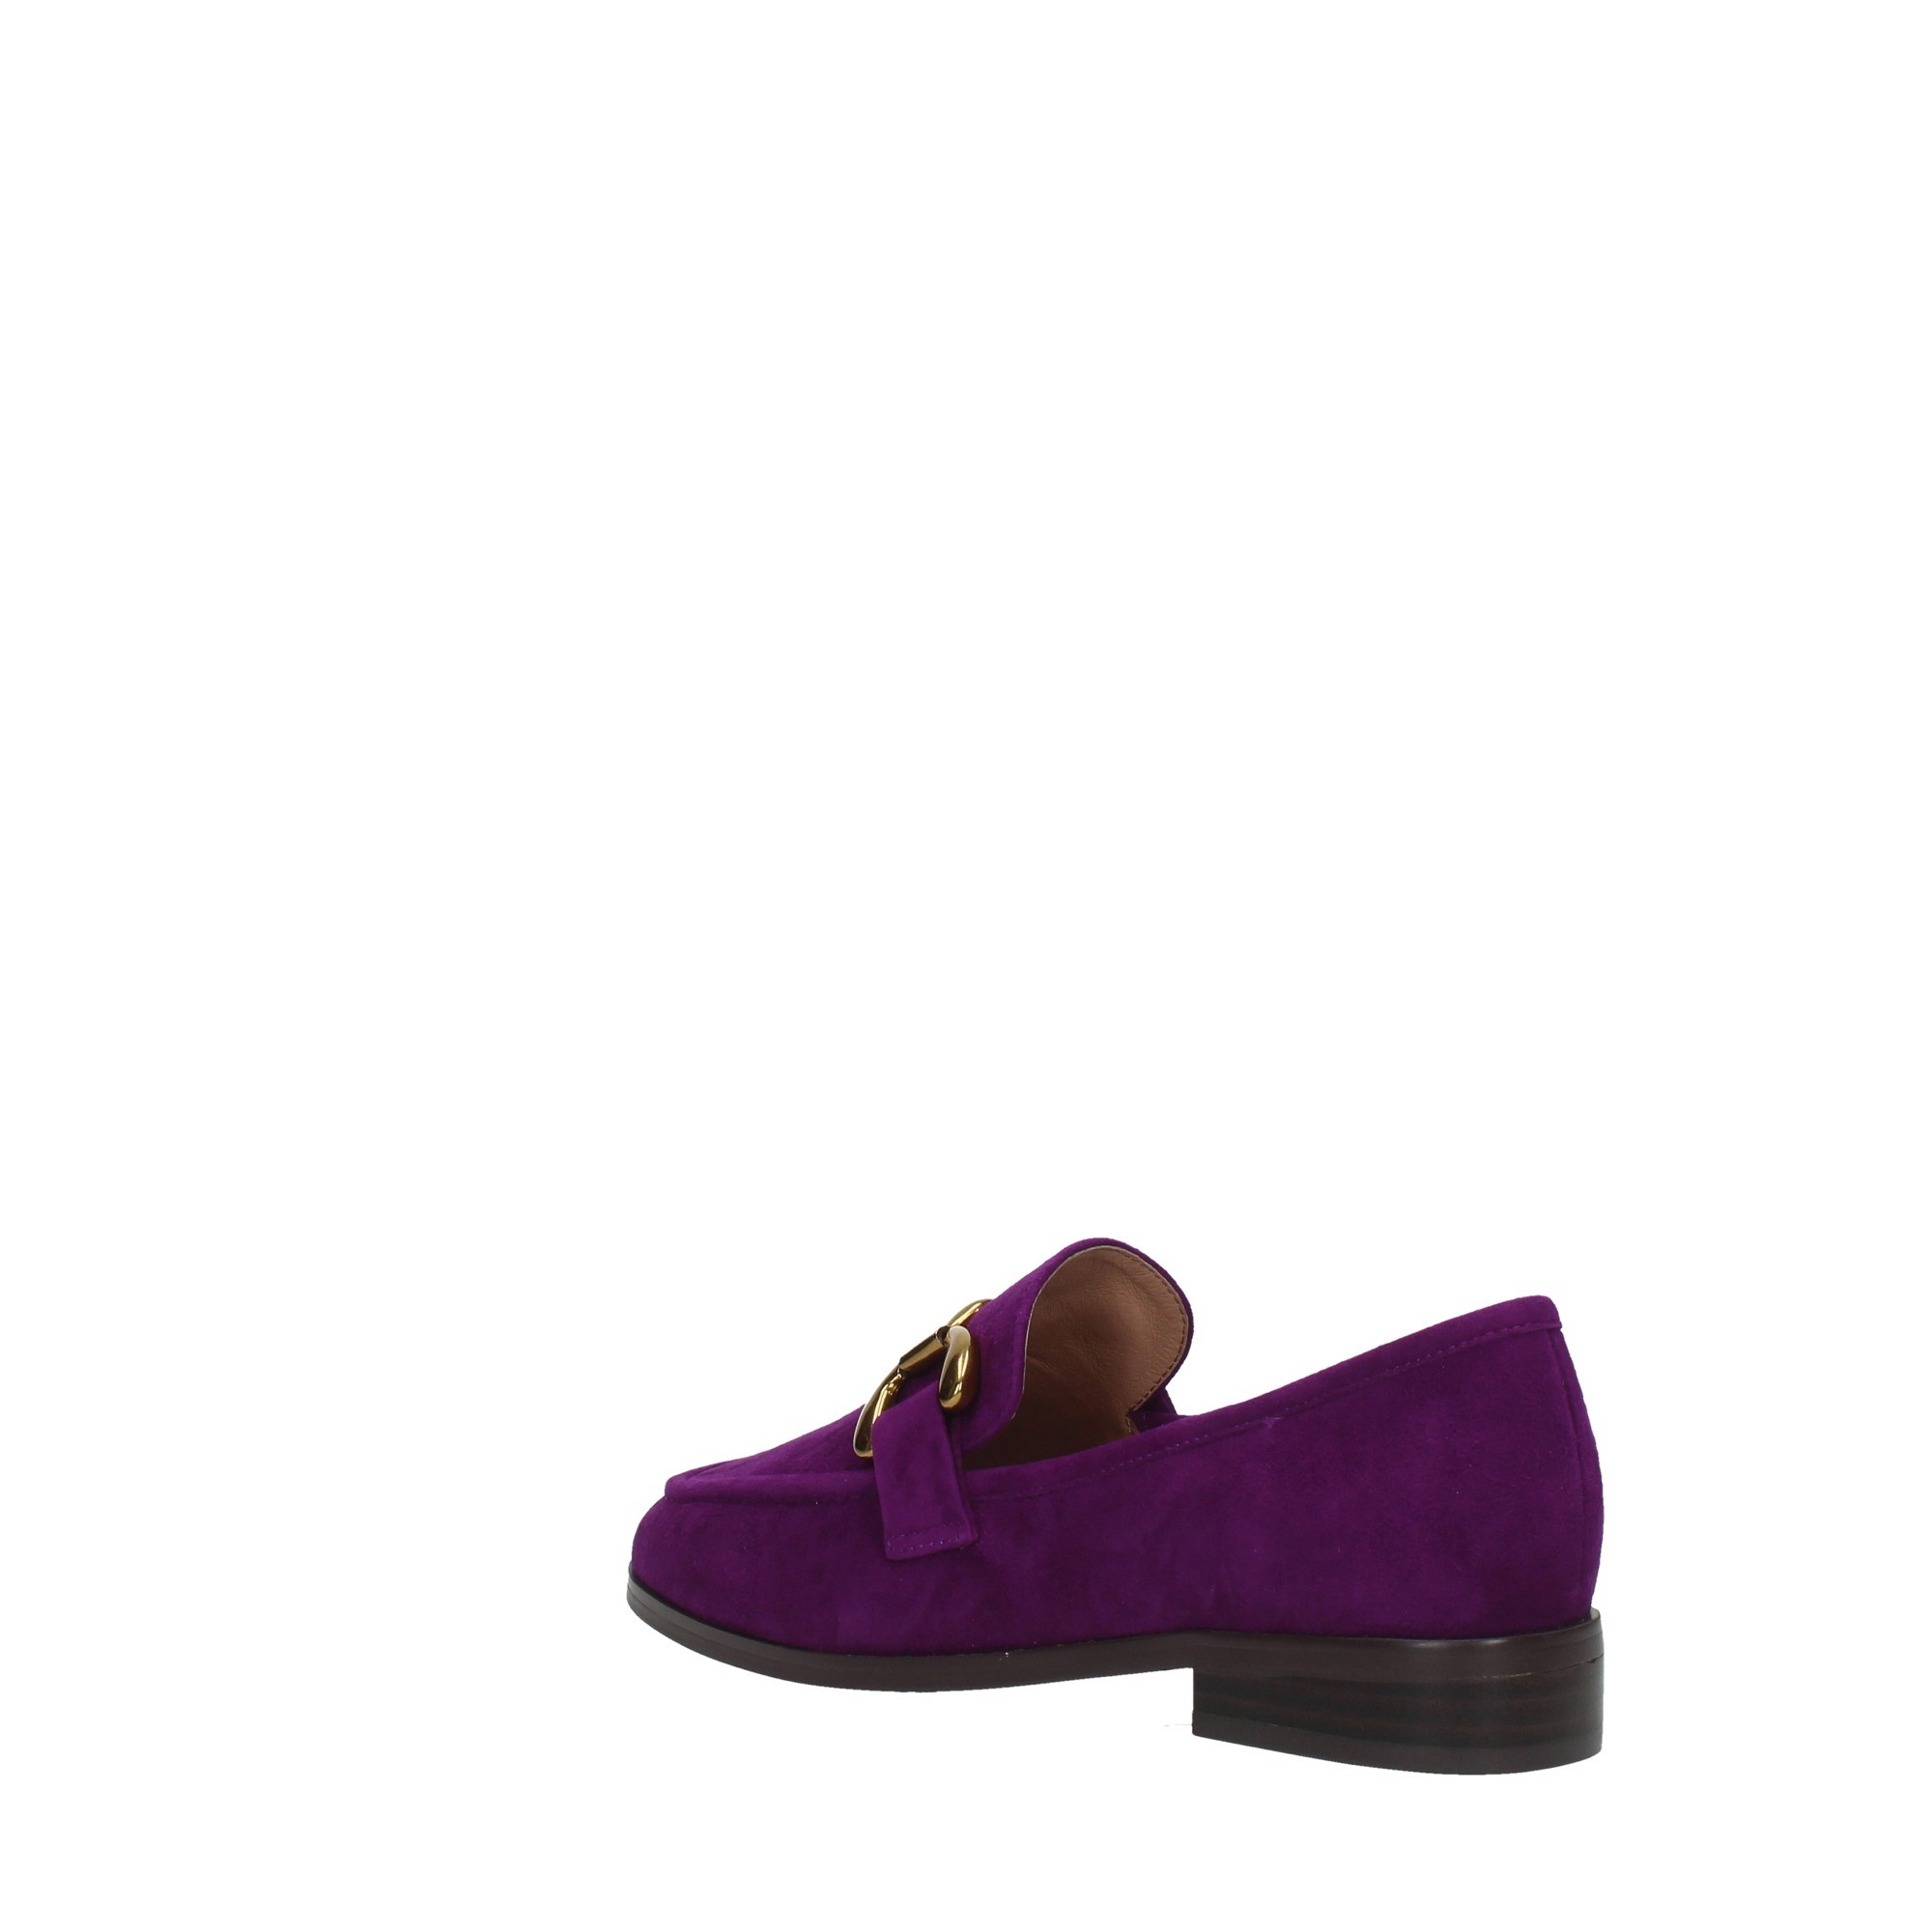 Bibilou Shoes Women Moccasins And Slippers 572